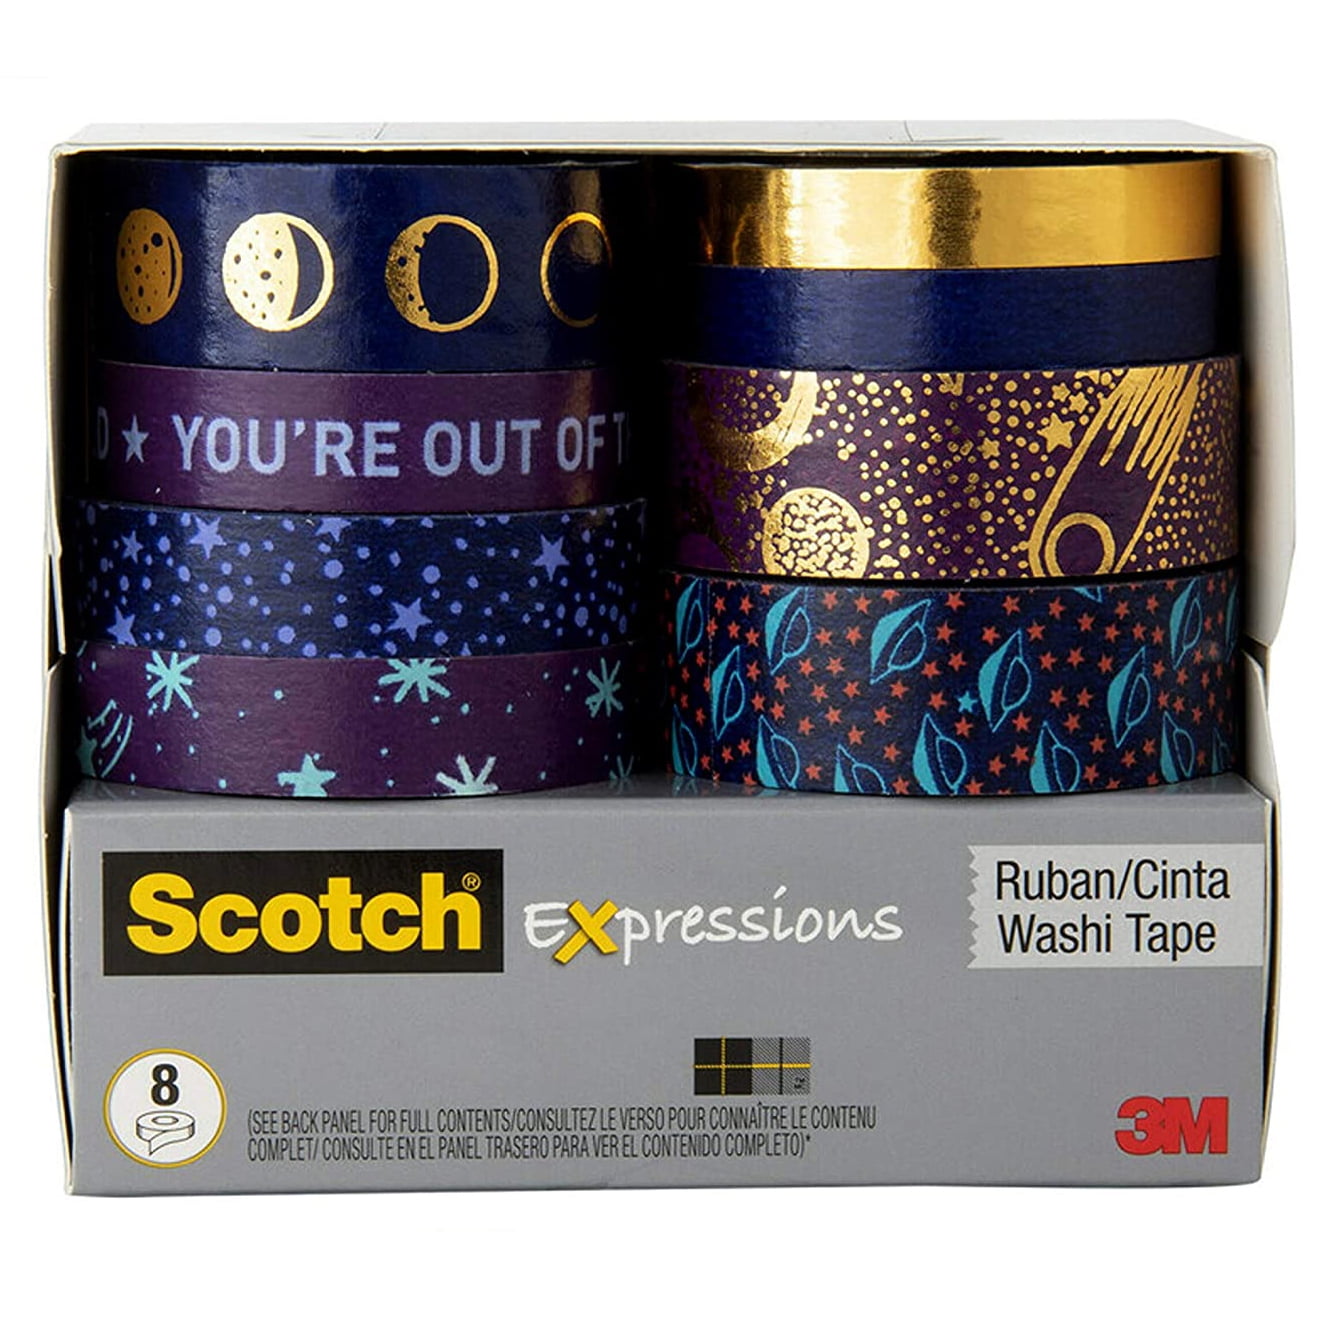 Great for Decorating and Crafts 8 Rolls C1017-8-P8 Scotch Expressions Washi Tap 